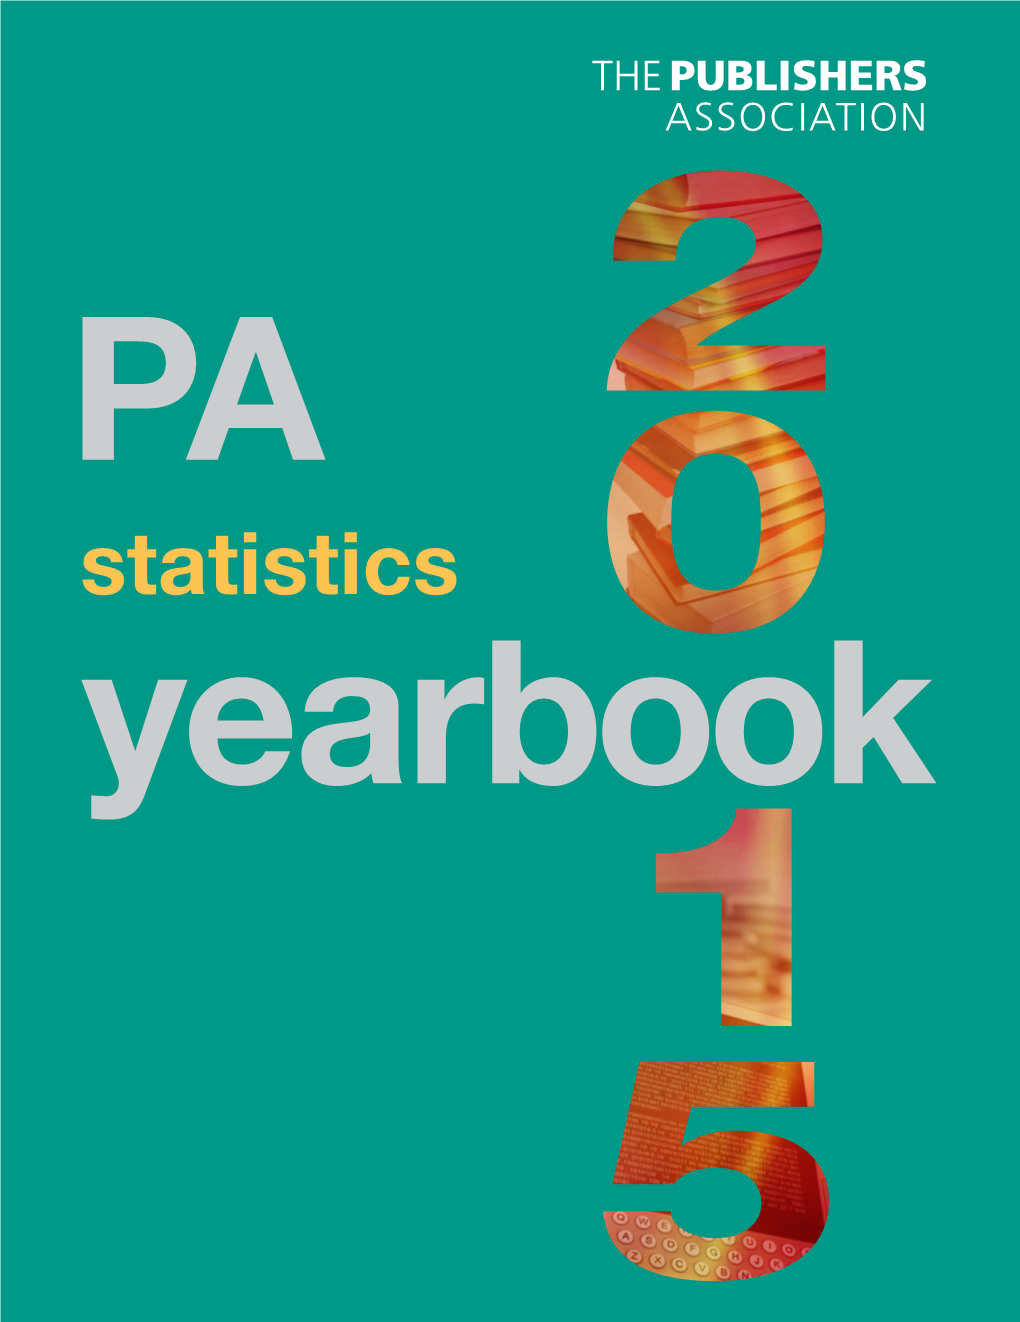 Read the PA Statistics Yearbook 2015